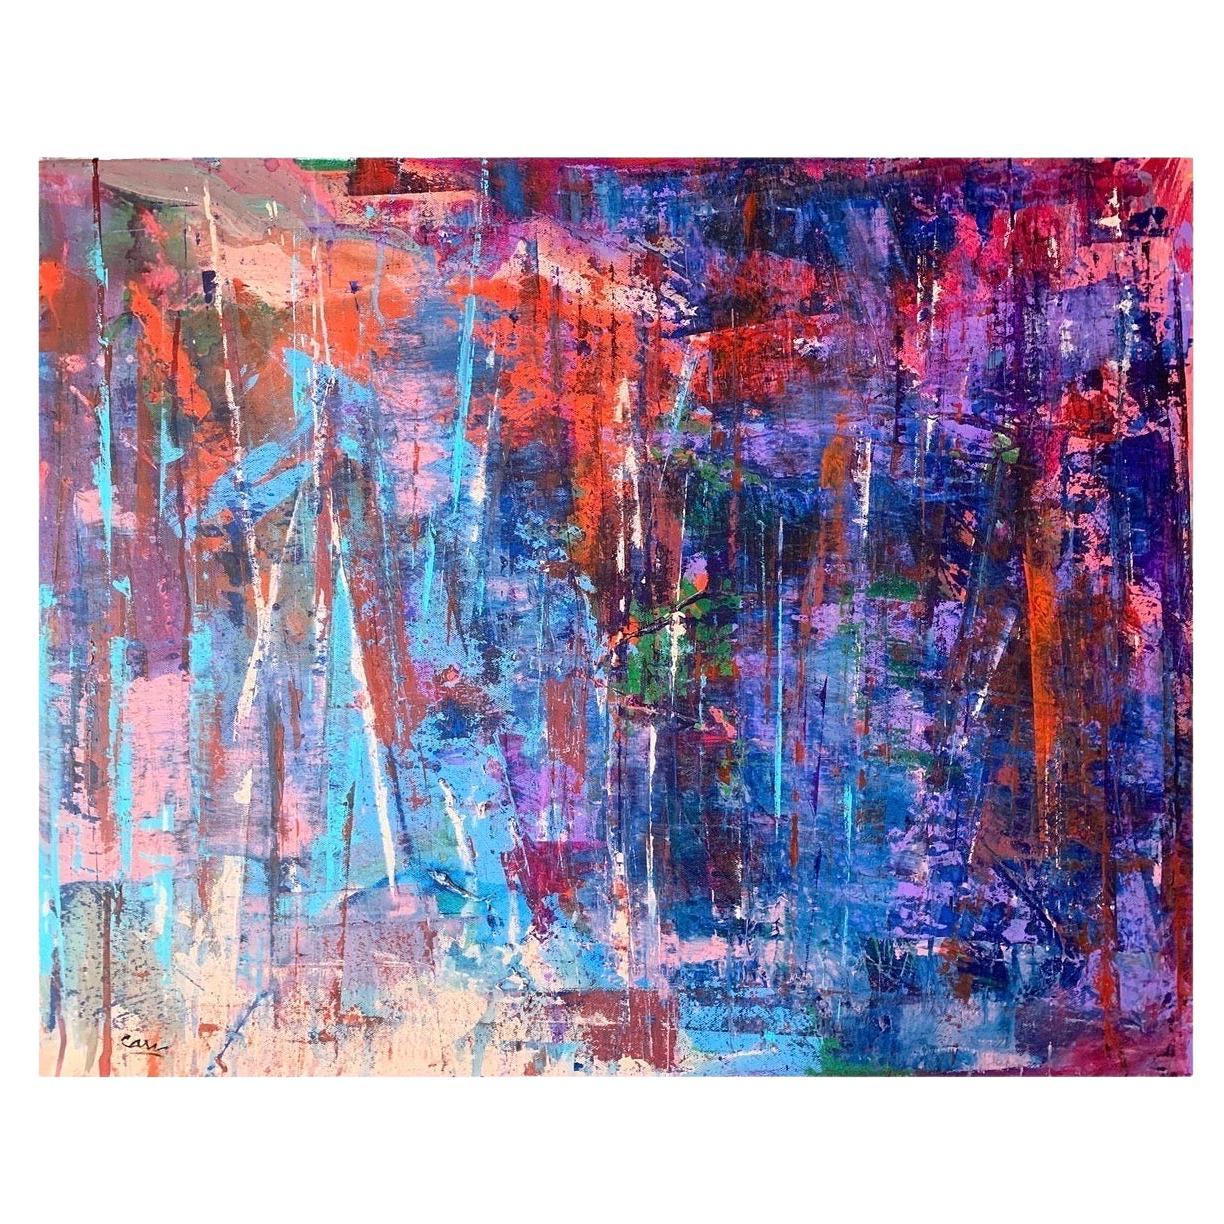 Signed Colorful Original Abstract Expressionist Painting by Arlene Carr